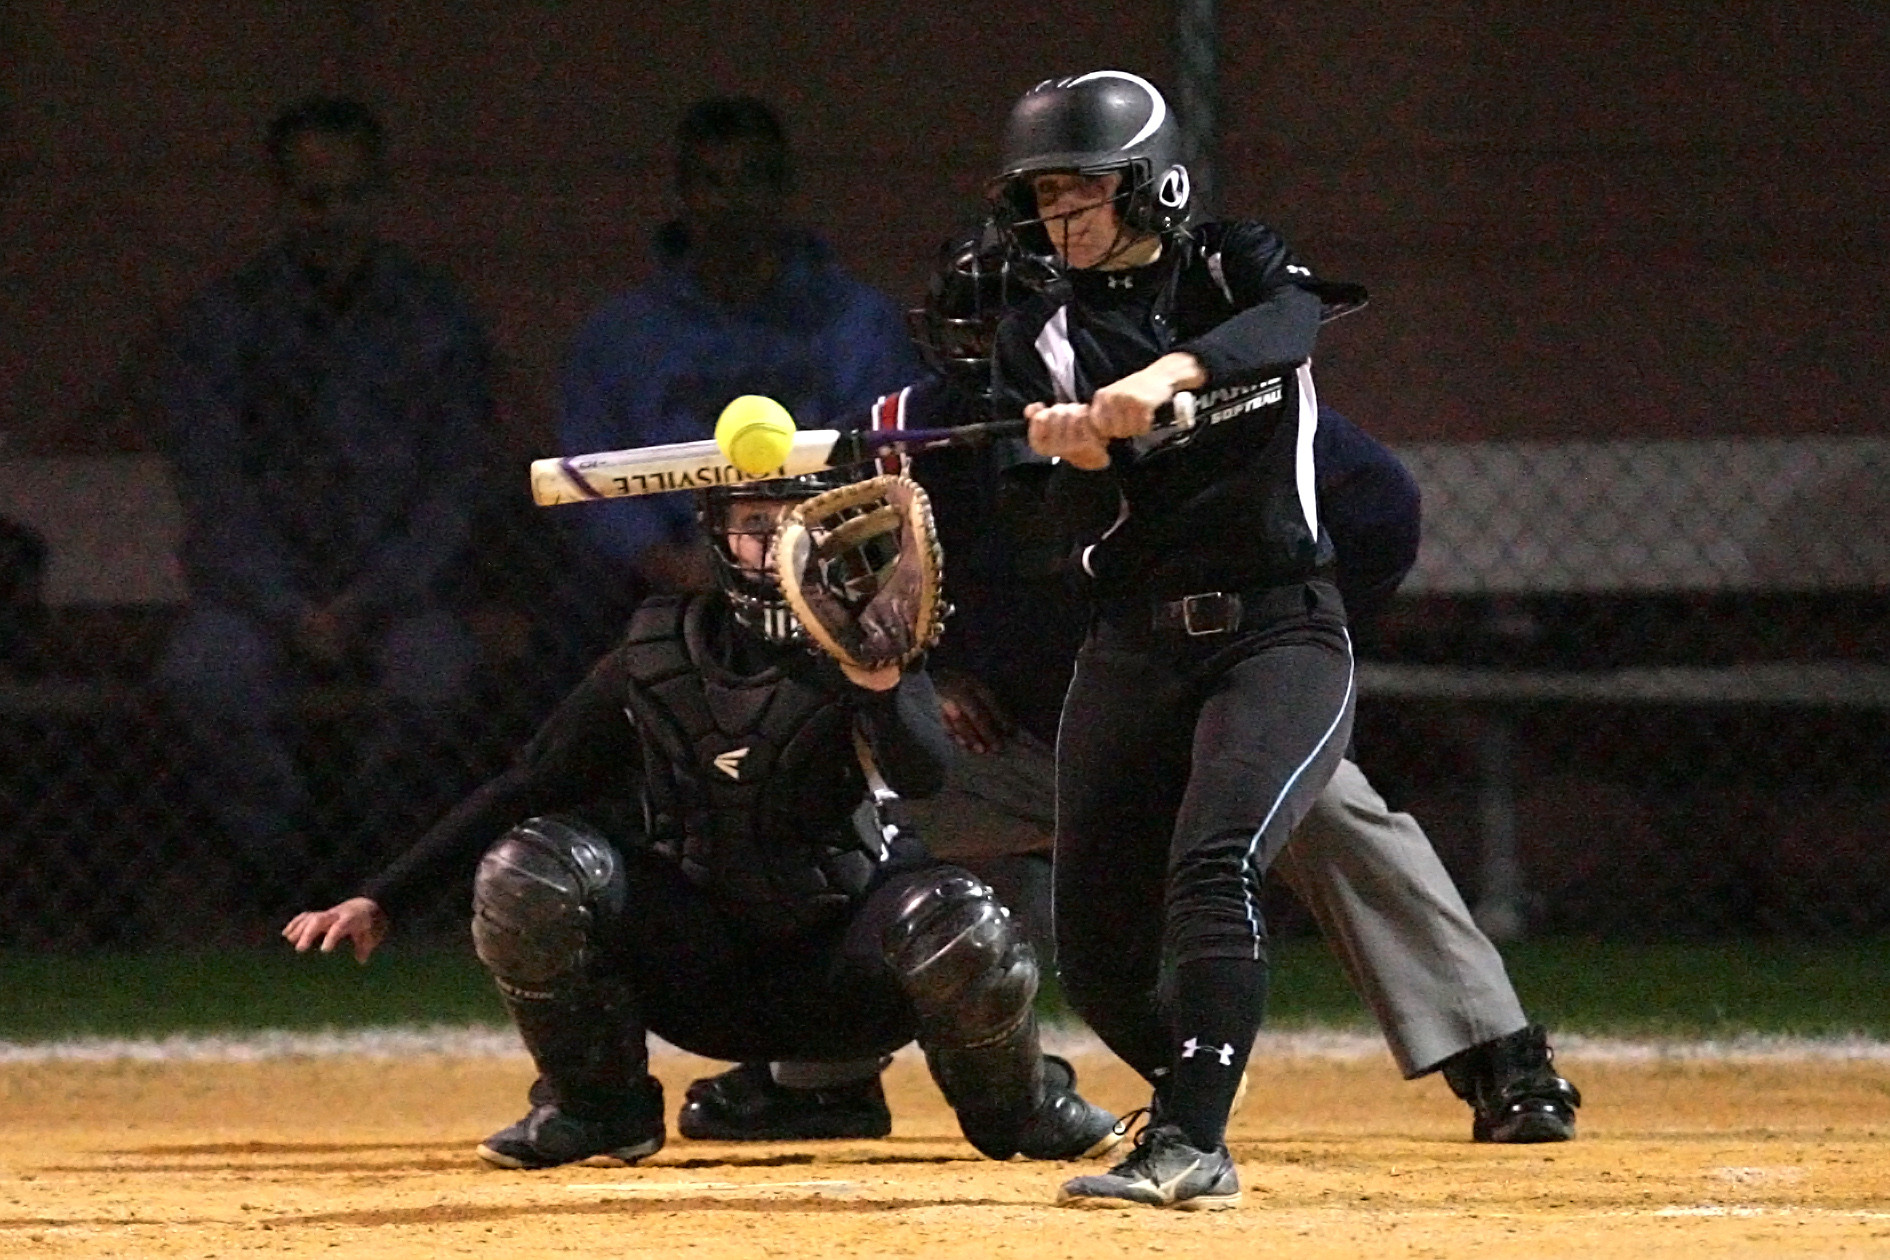 Taylor Bradshaw smacks a base hit for the Sharks